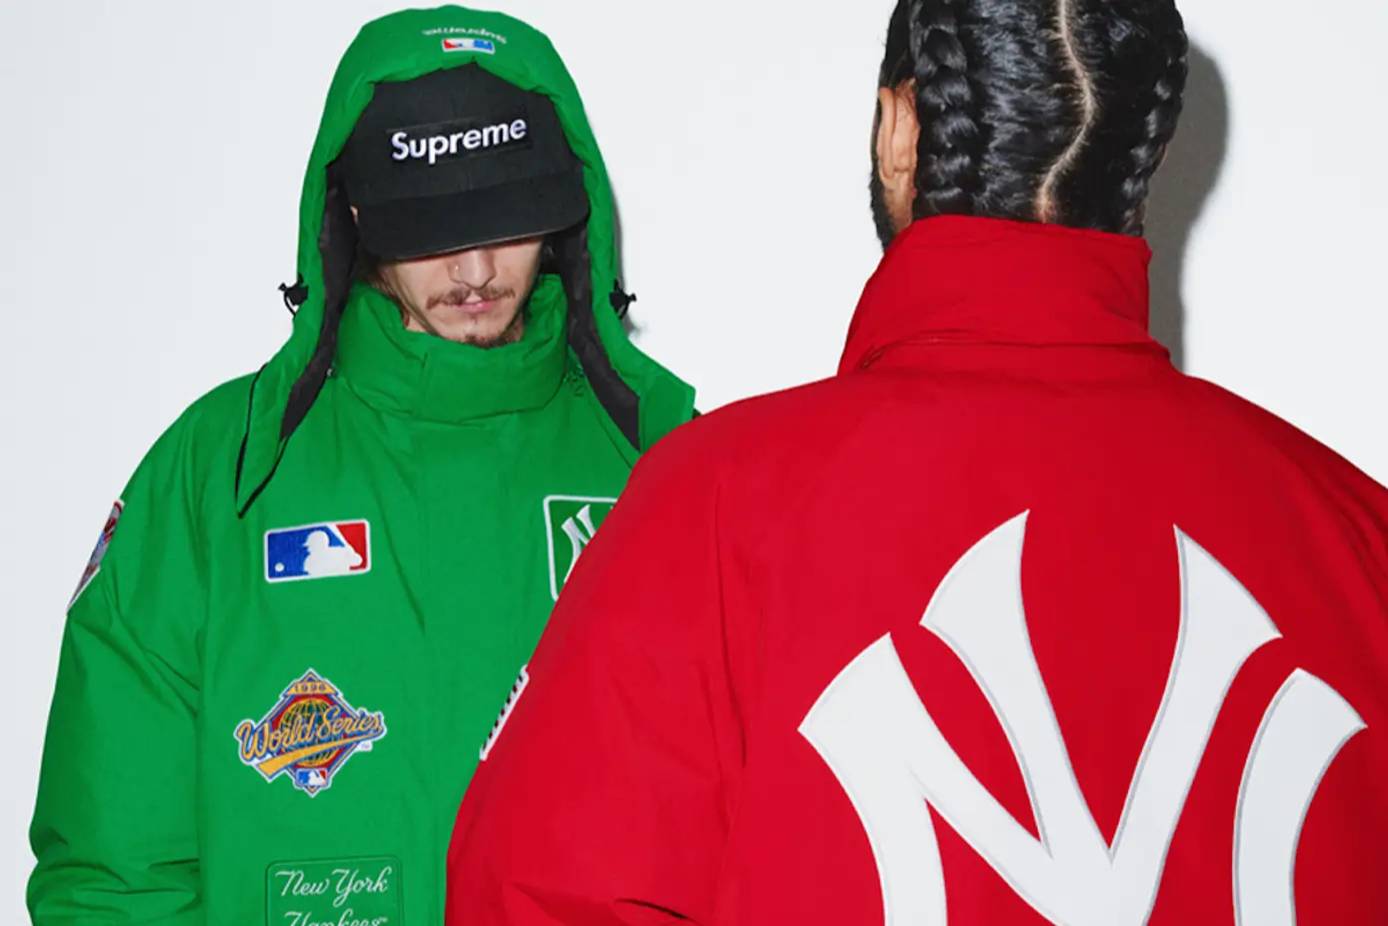 Tremaine Emory: The new Creative Director of Supreme